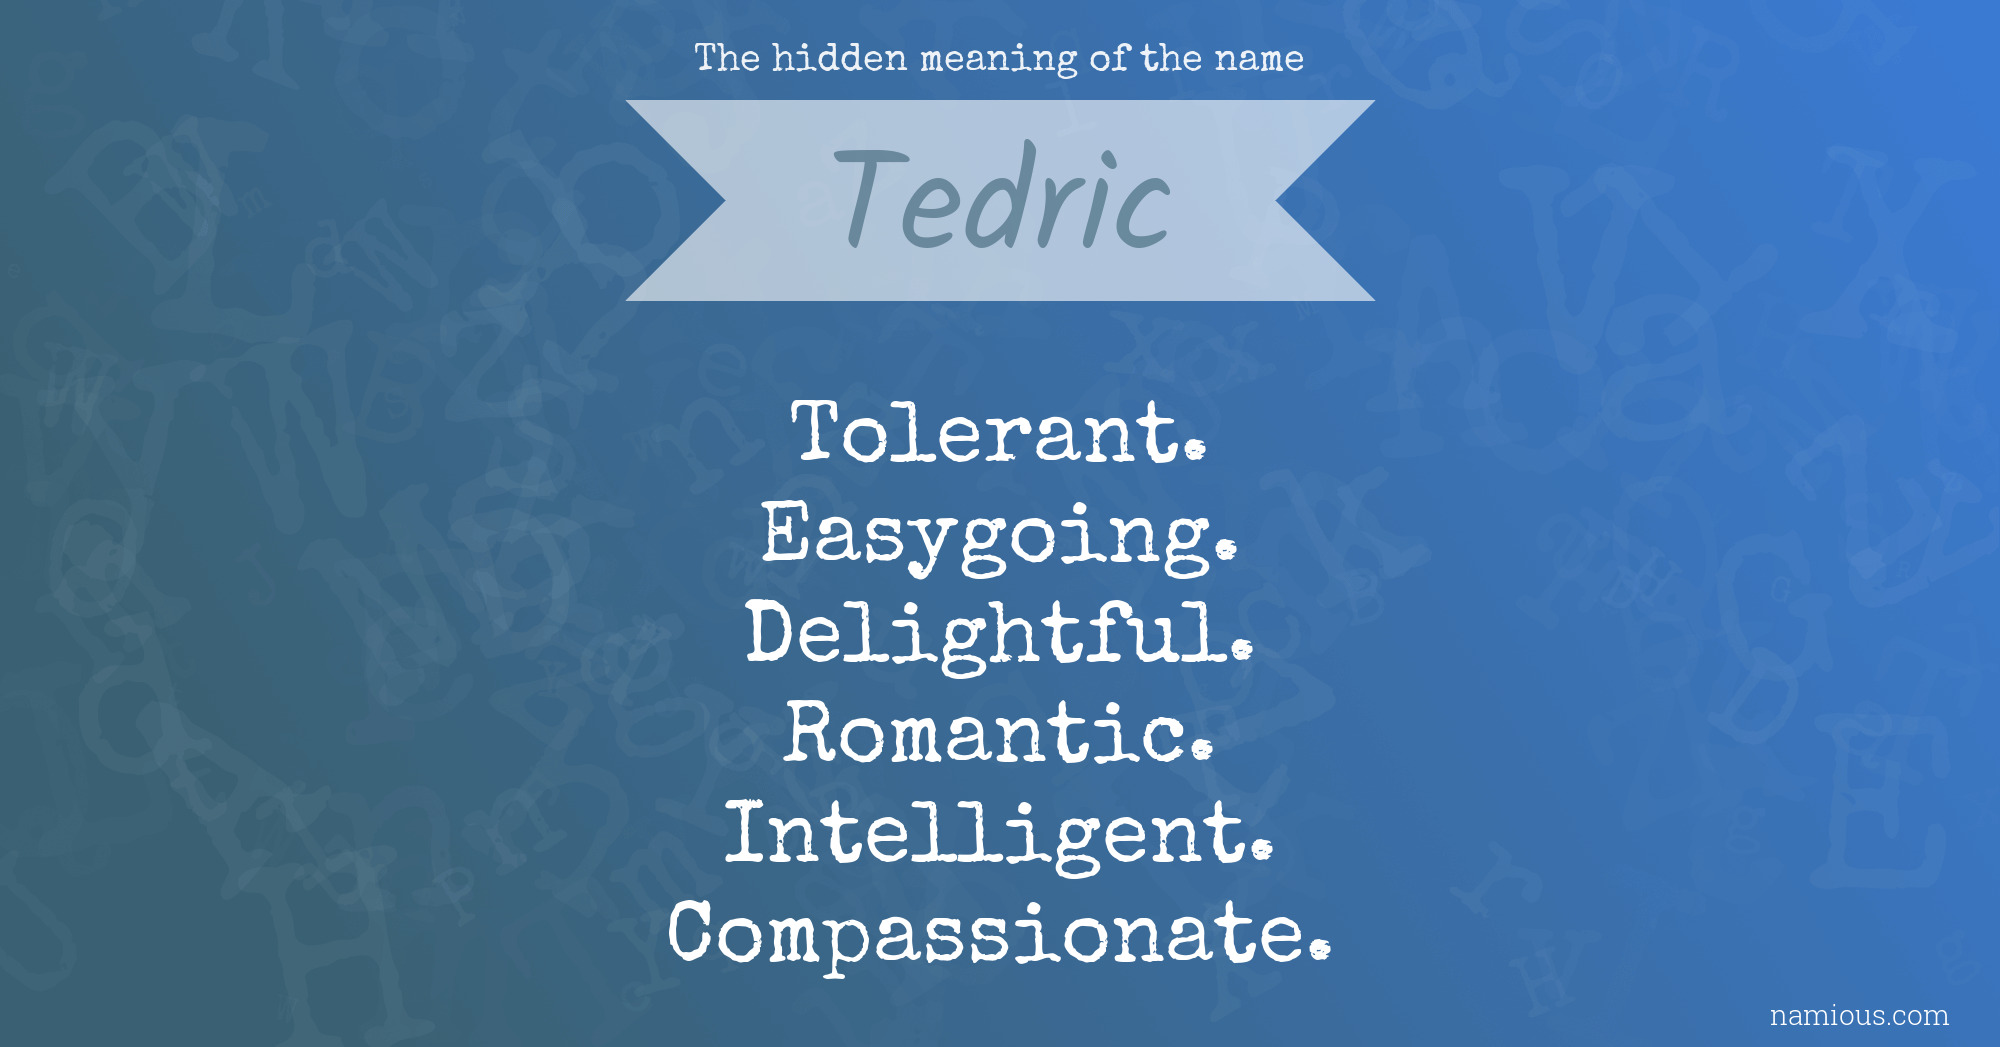 The hidden meaning of the name Tedric